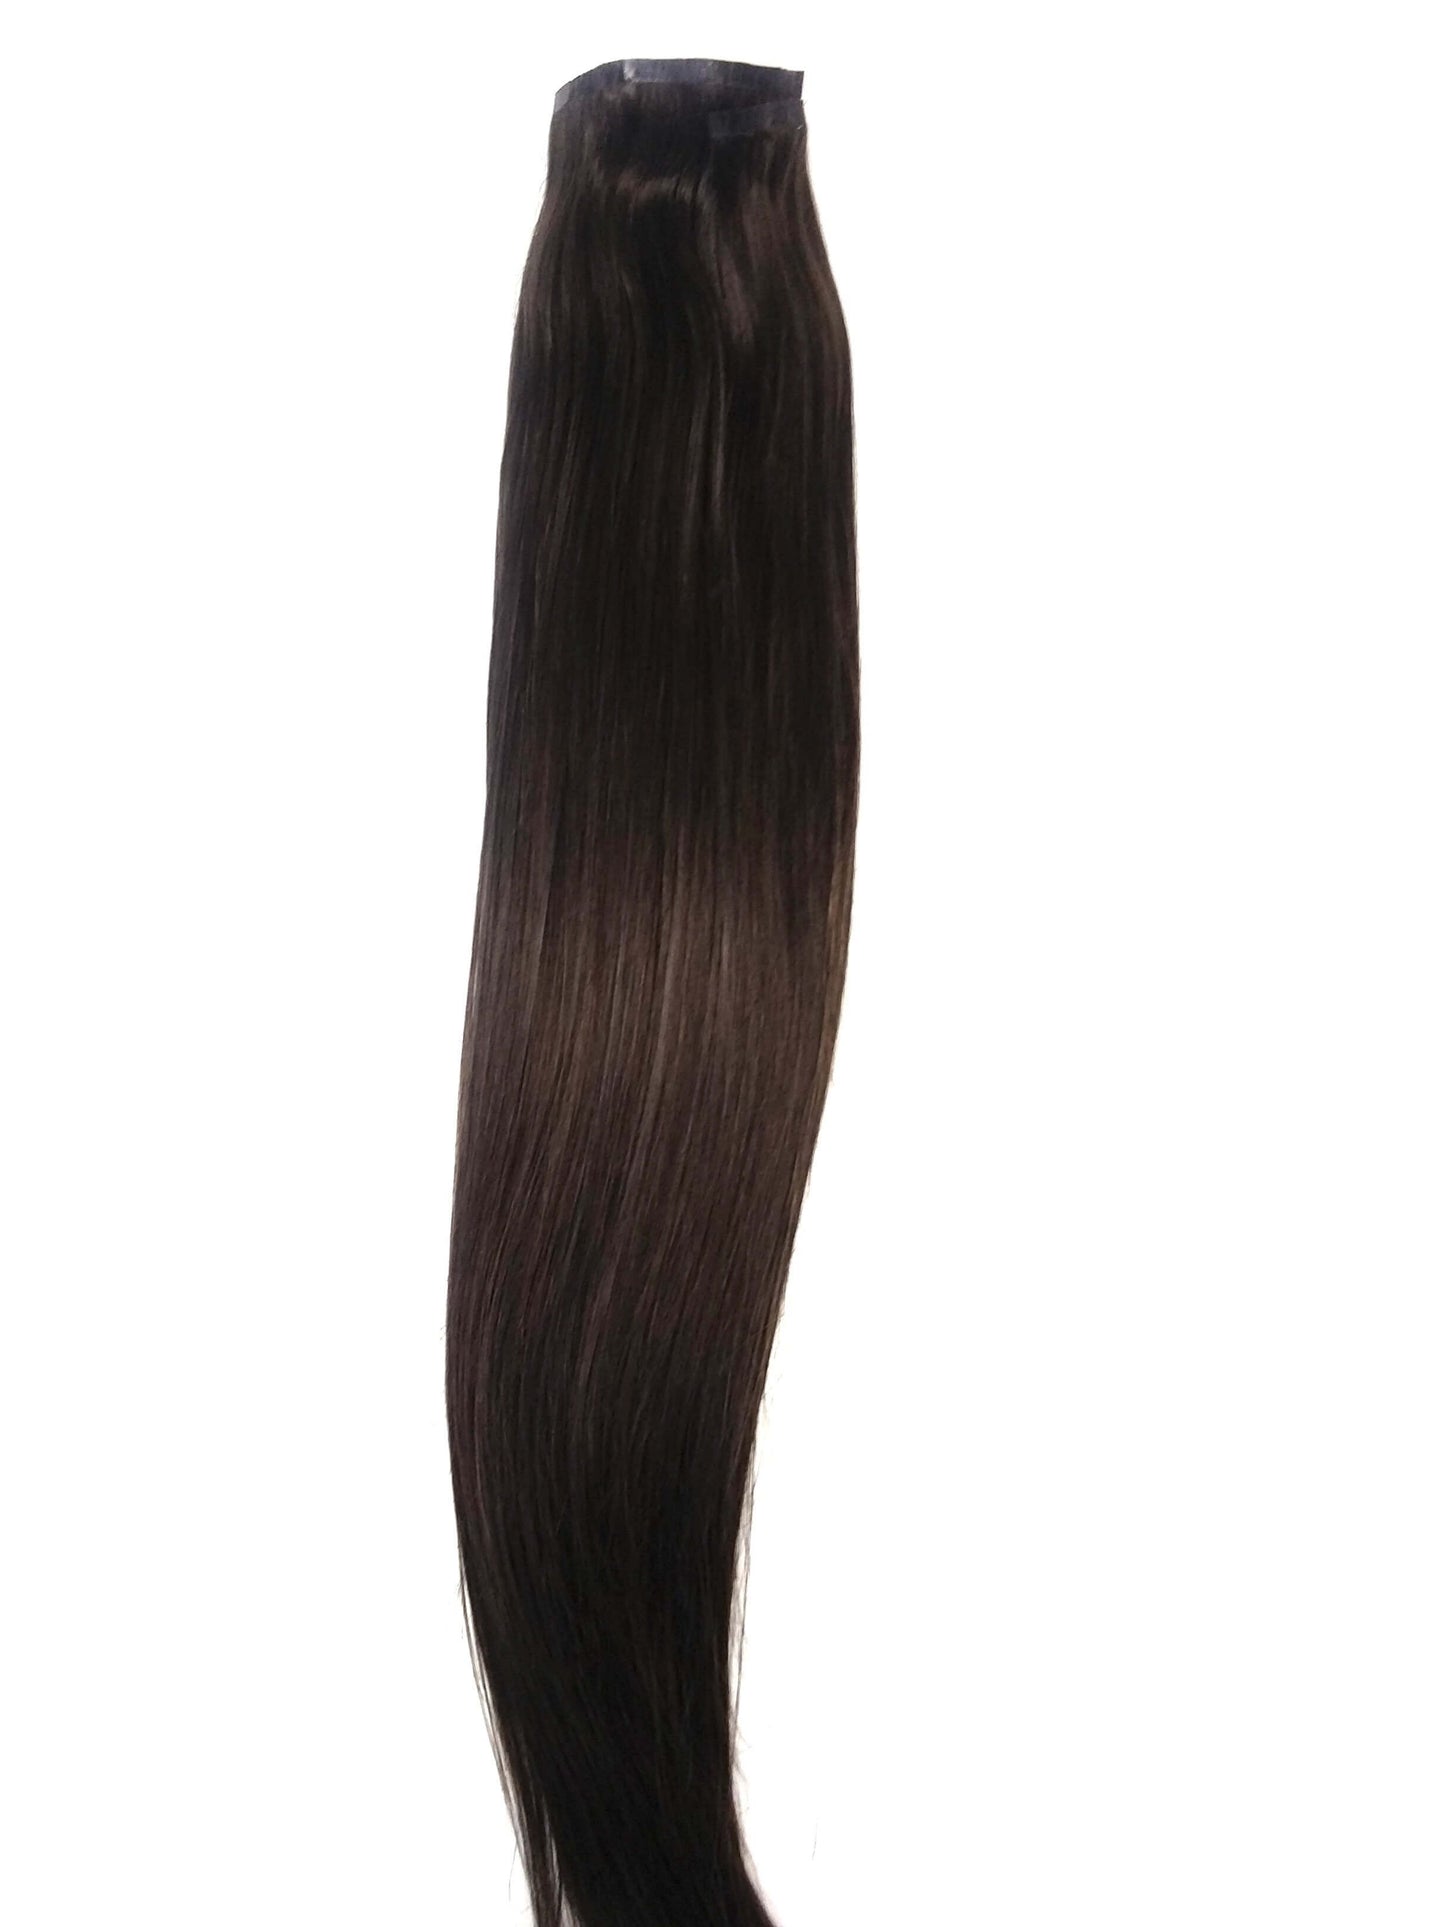 Brazilian Virgin Remy Human Hair - PU Clip In Extensions, 20'', Straight, Colour 2 ,100g - Quick Shipping